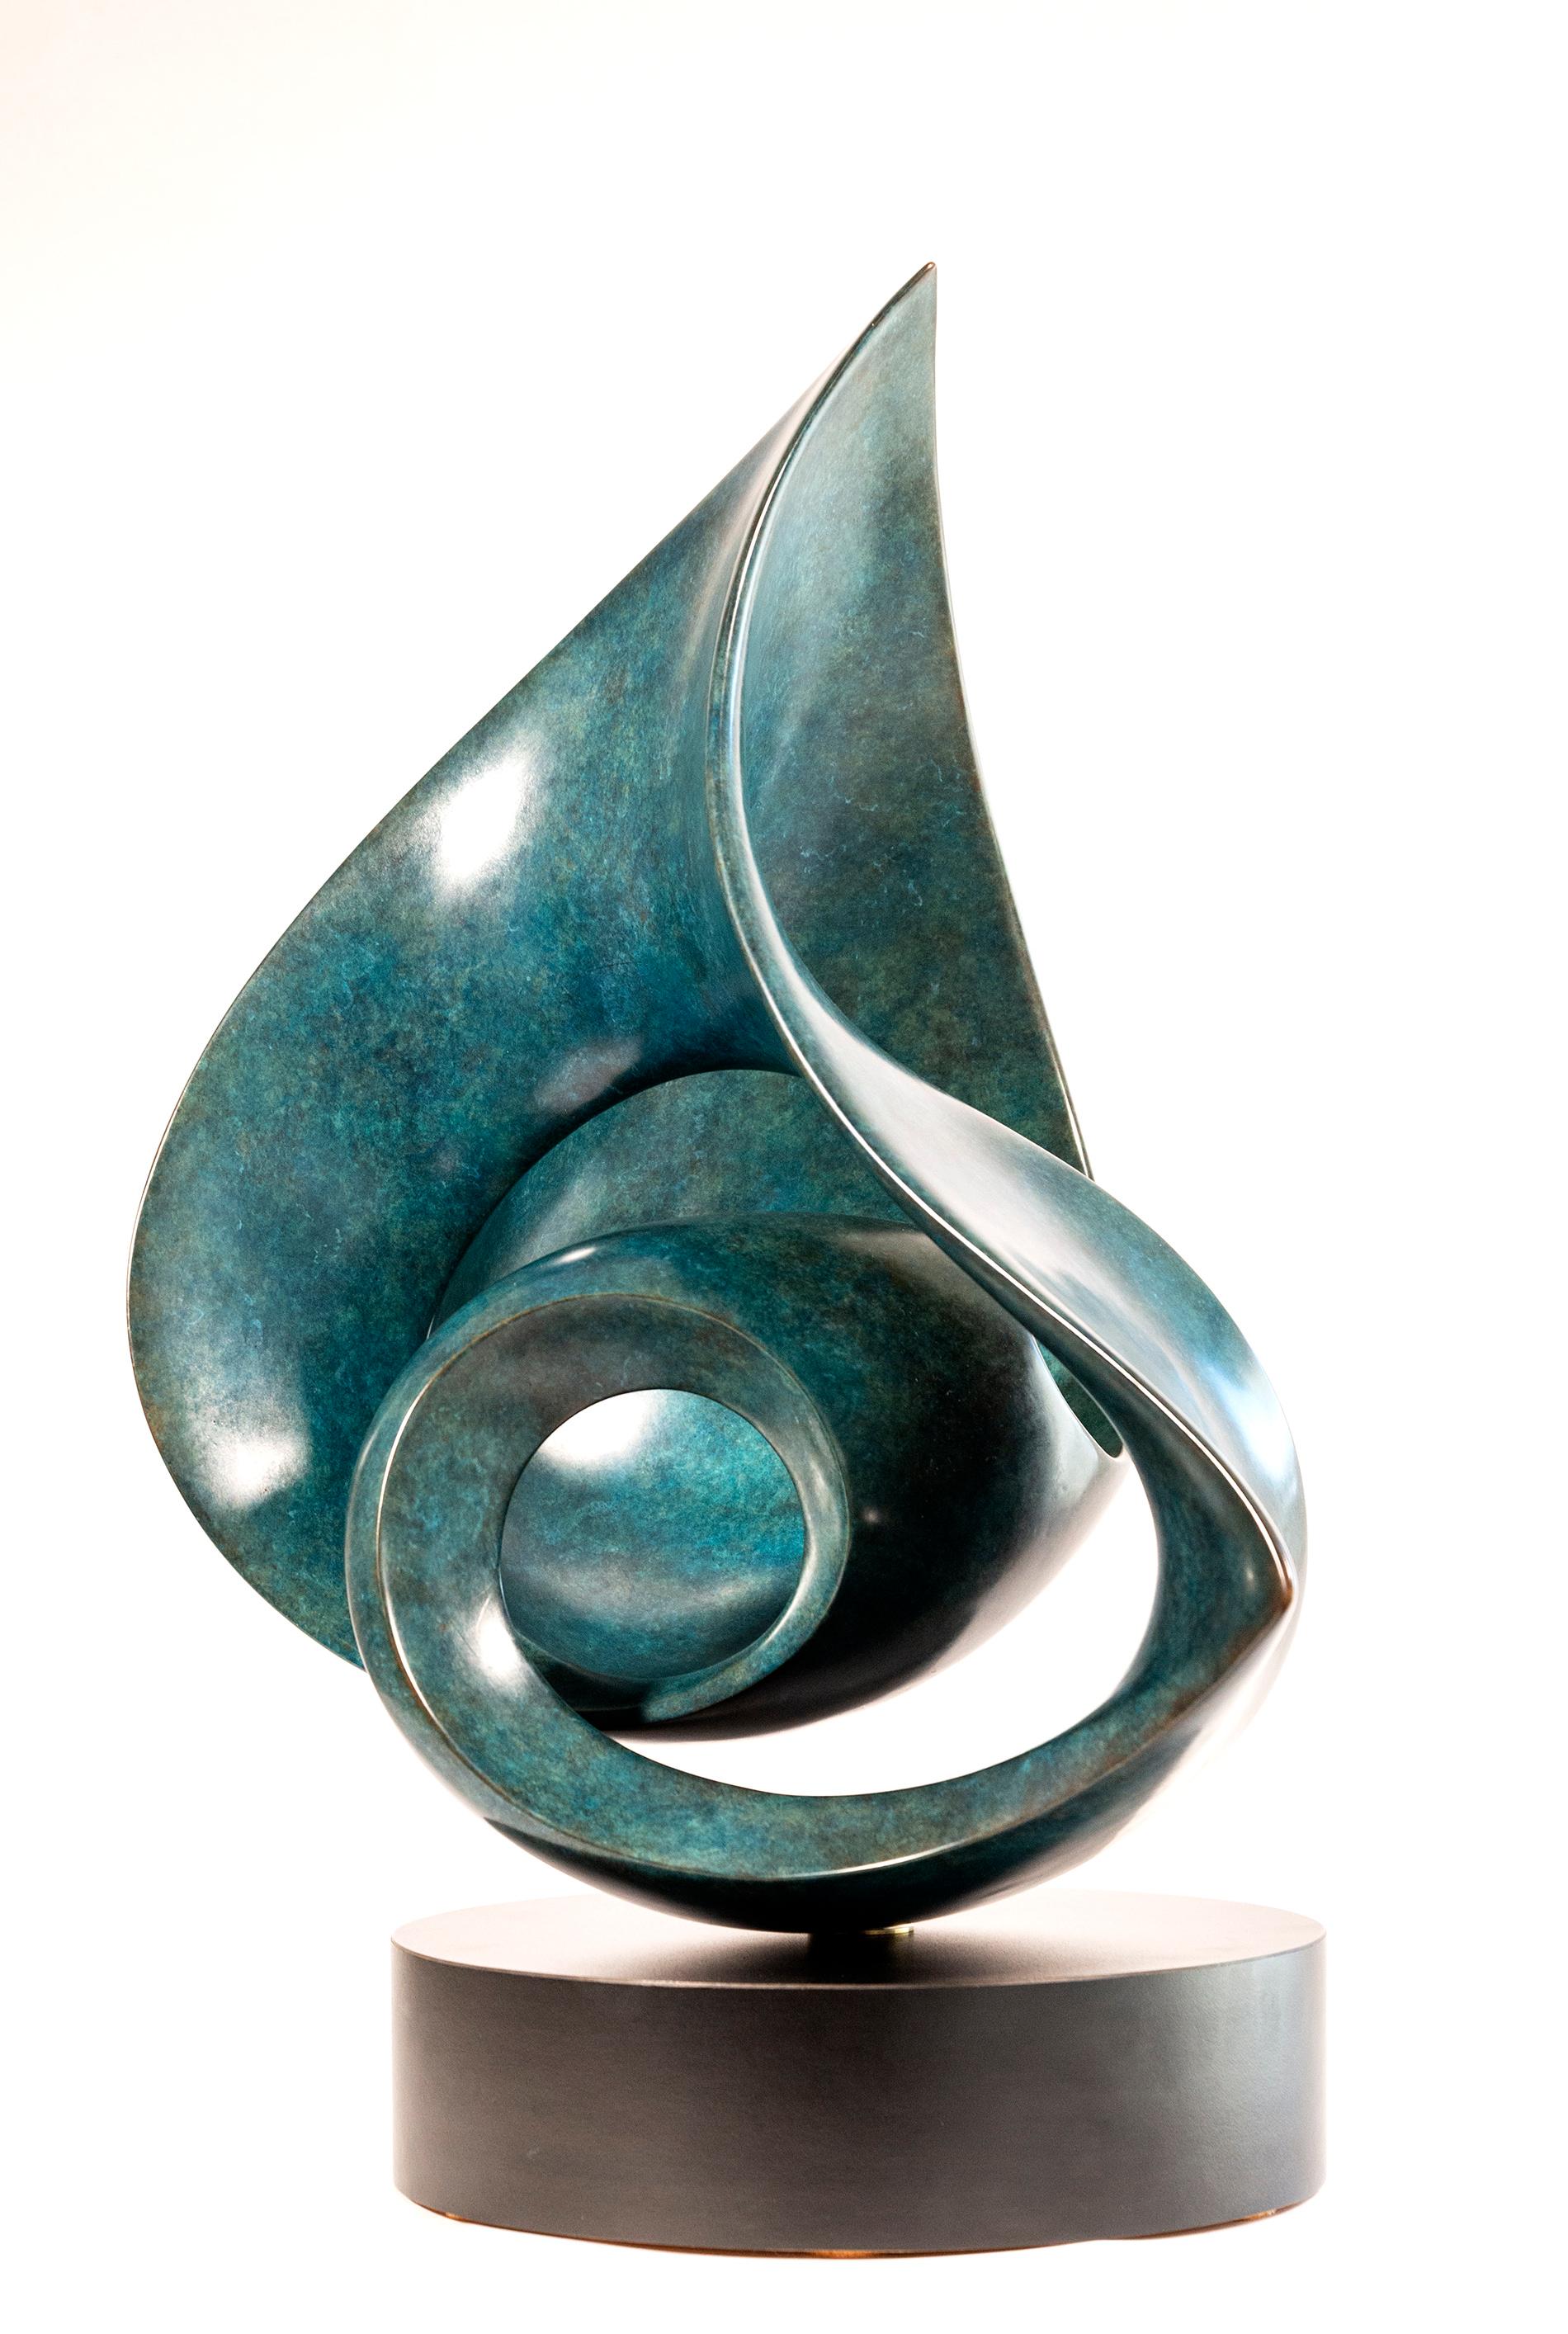 Eroica A.P. 1 - smooth, polished, abstract, contemporary, bronze sculpture For Sale 7